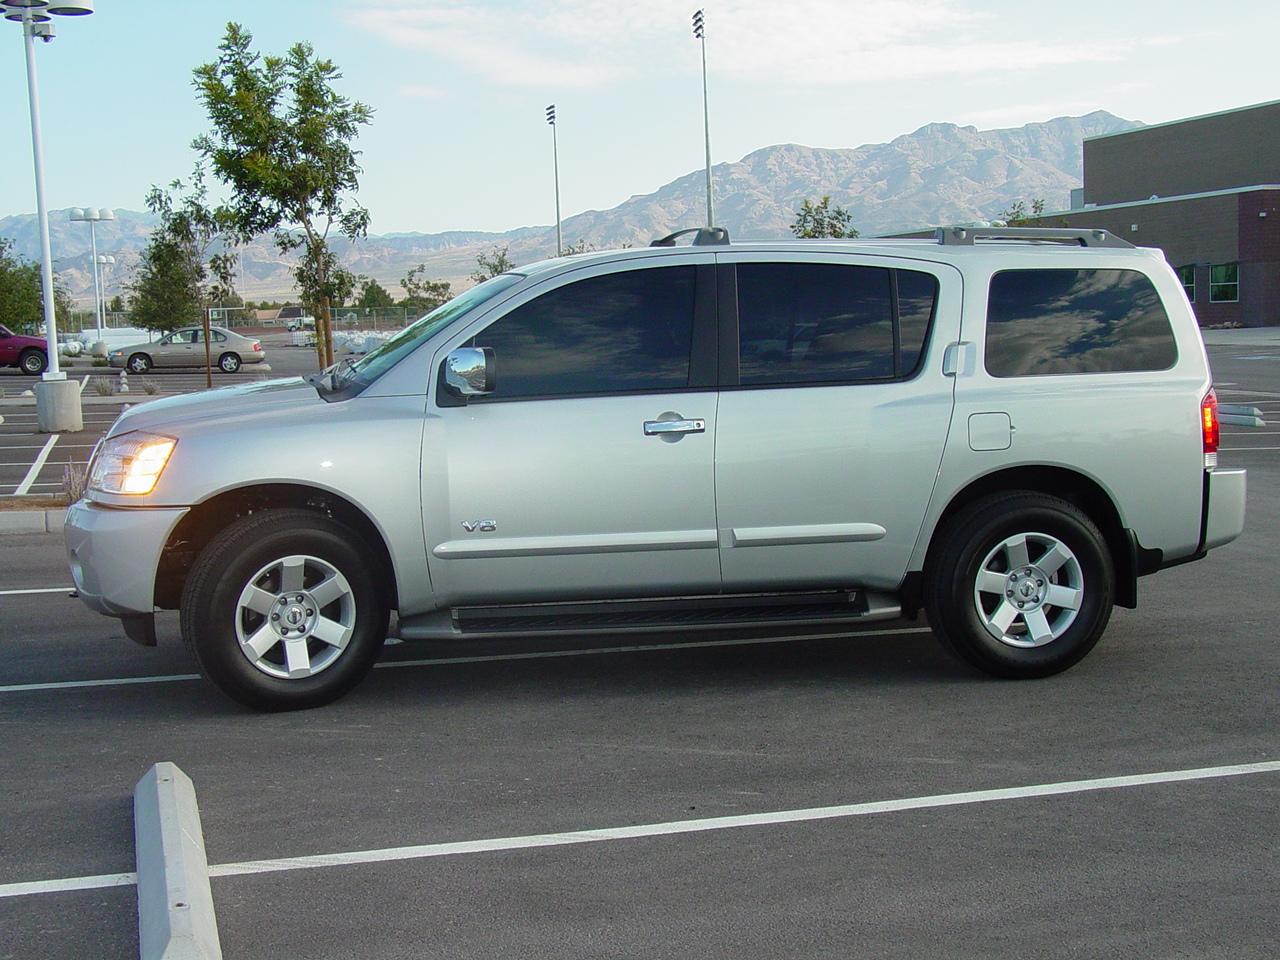 Nissan armada picture gallery #10